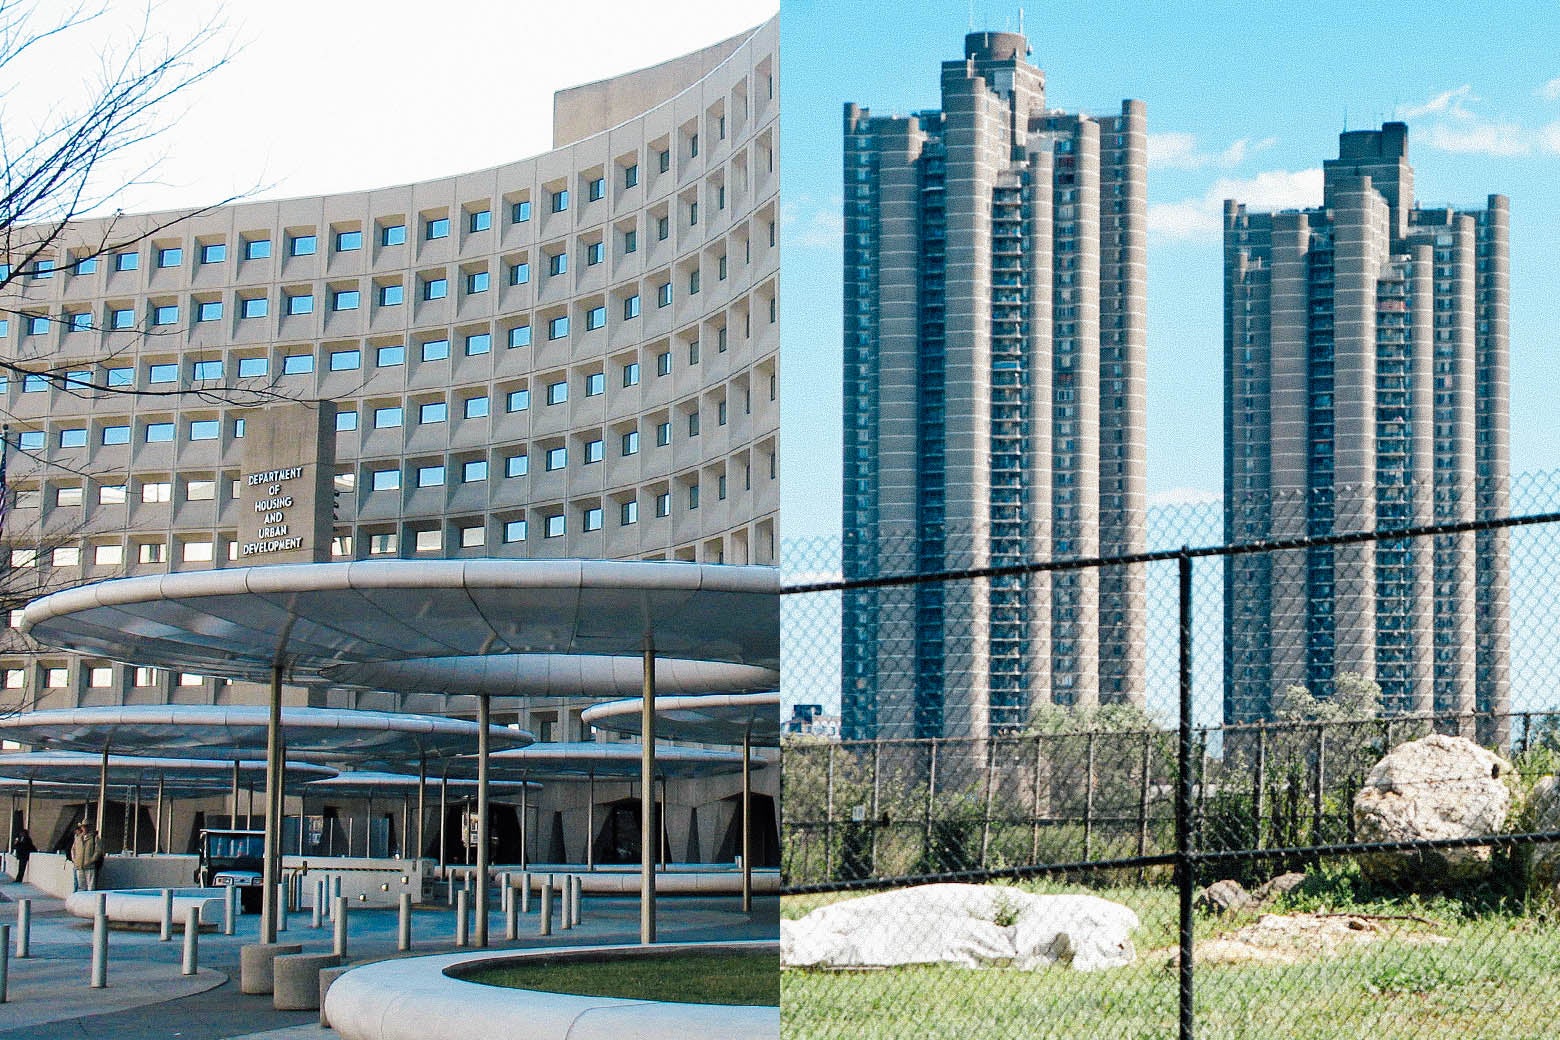 At left: The U.S. Department of Housing and Urban Development headquarters in Washington. At right: The Tracey Towers in the Bronx.